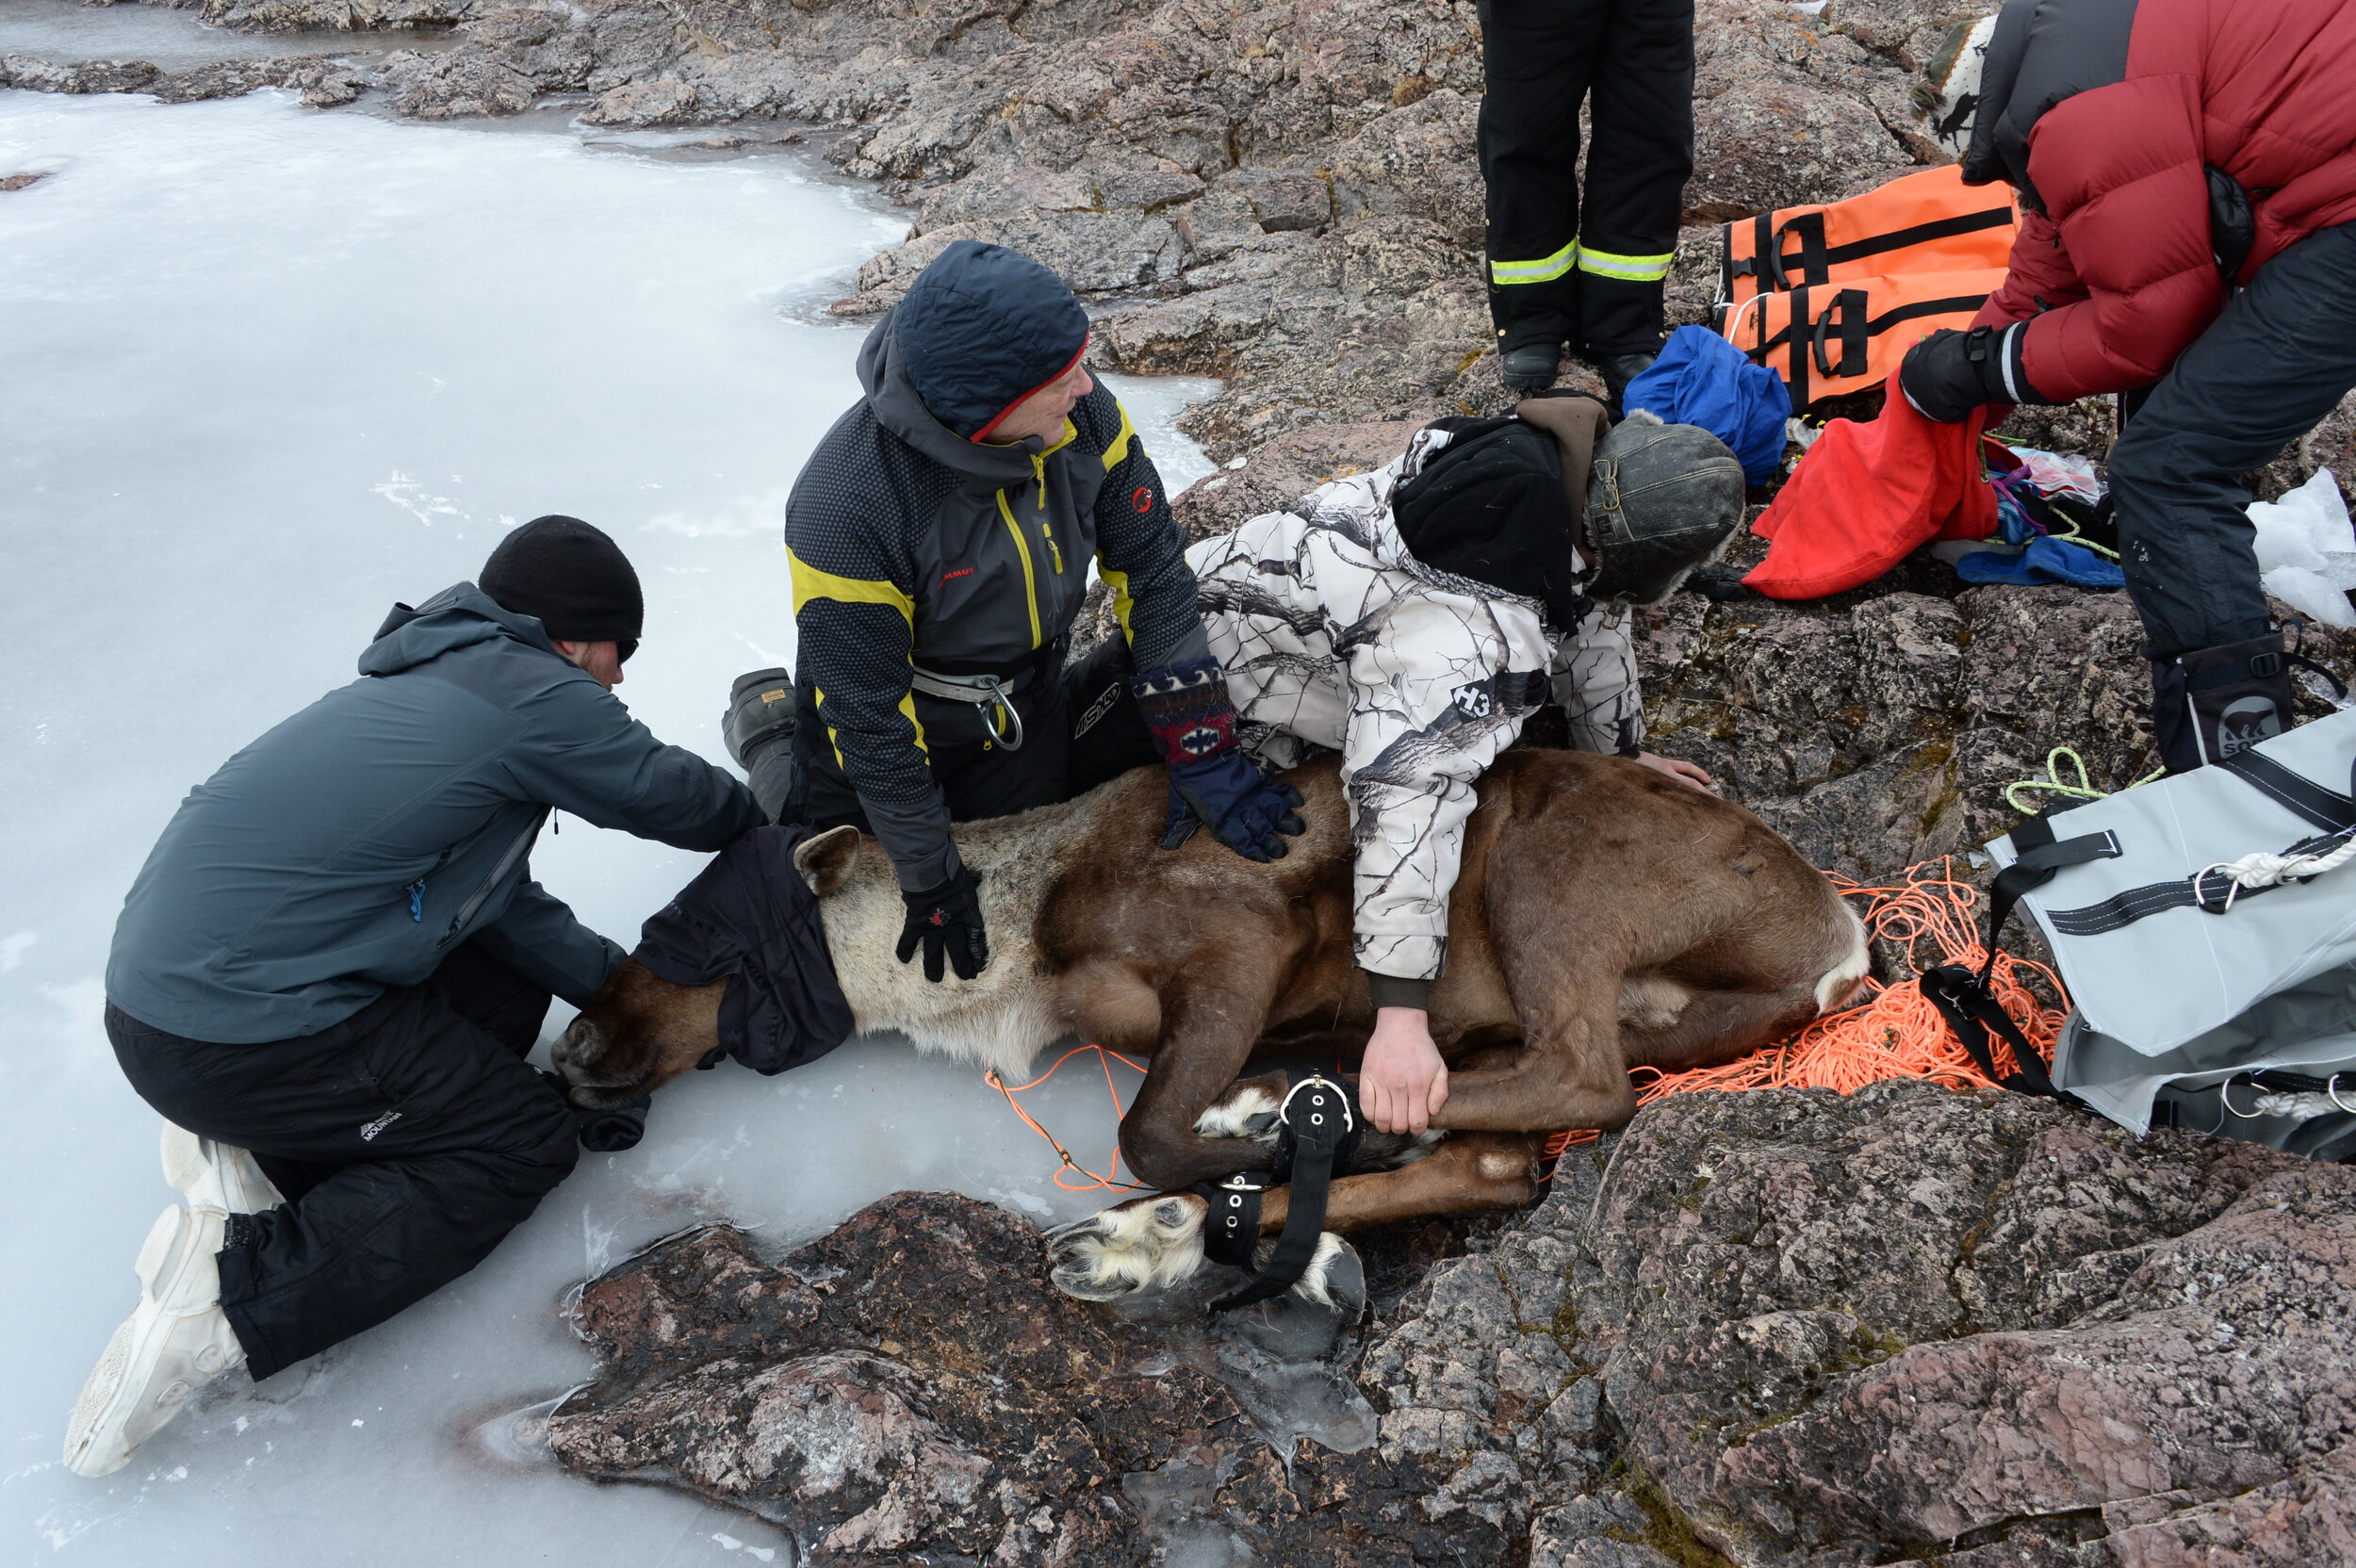 A caribou captured by people, with its legs bound and its eyes covered, lies calmly on ice and rock as people hold it down